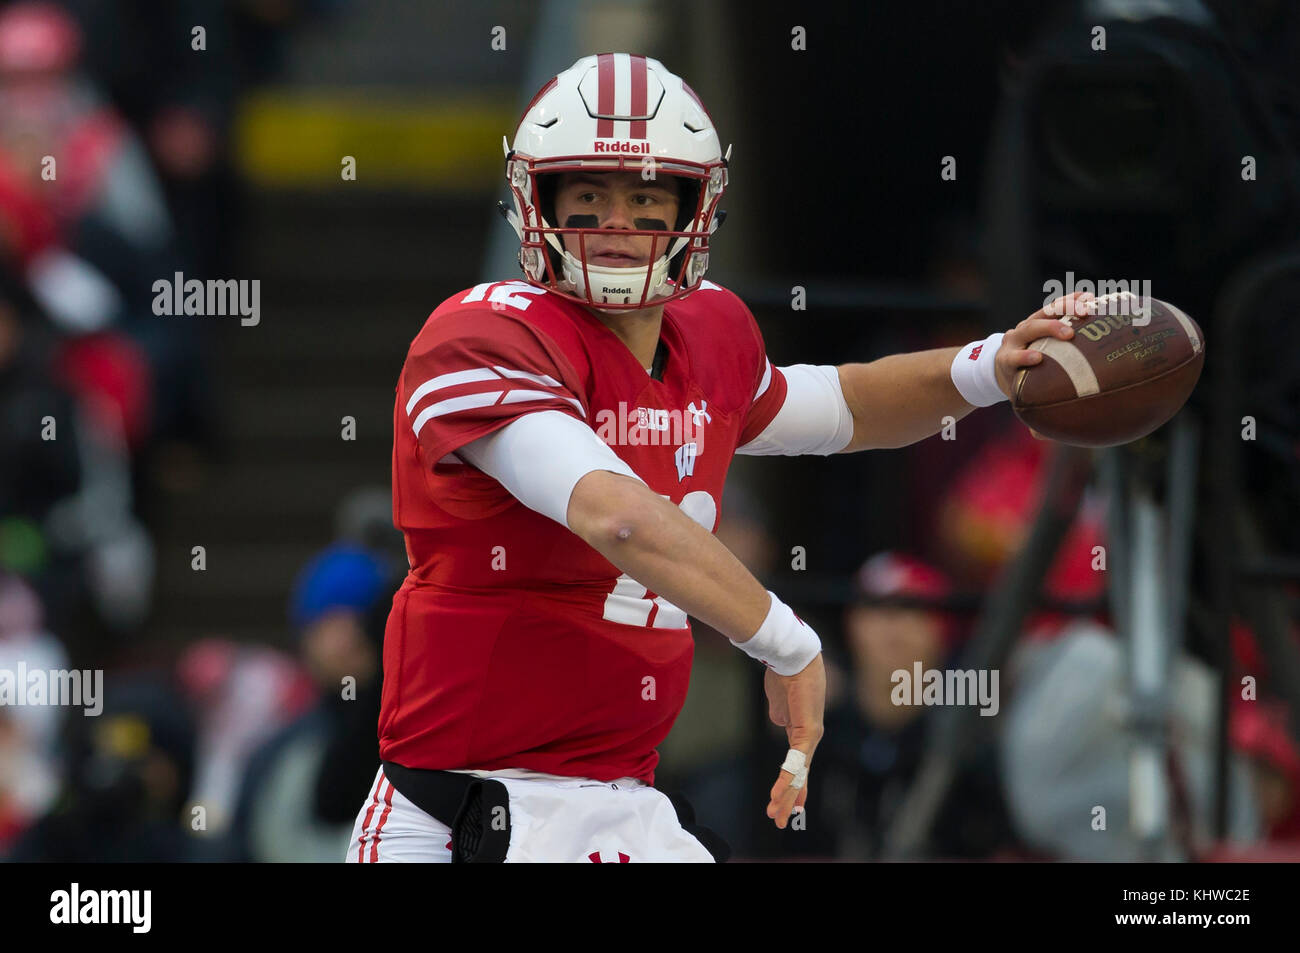 Madison, WI, USA. 18th Nov, 2017. Wisconsin Badgers quarterback Alex Hornibrook #12 delivers a pass during the NCAA Football game between the Michigan Wolverines and the Wisconsin Badgers at Camp Randall Stadium in Madison, WI. Wisconsin defeated Michigan 24-10. John Fisher/CSM/Alamy Live News Stock Photo